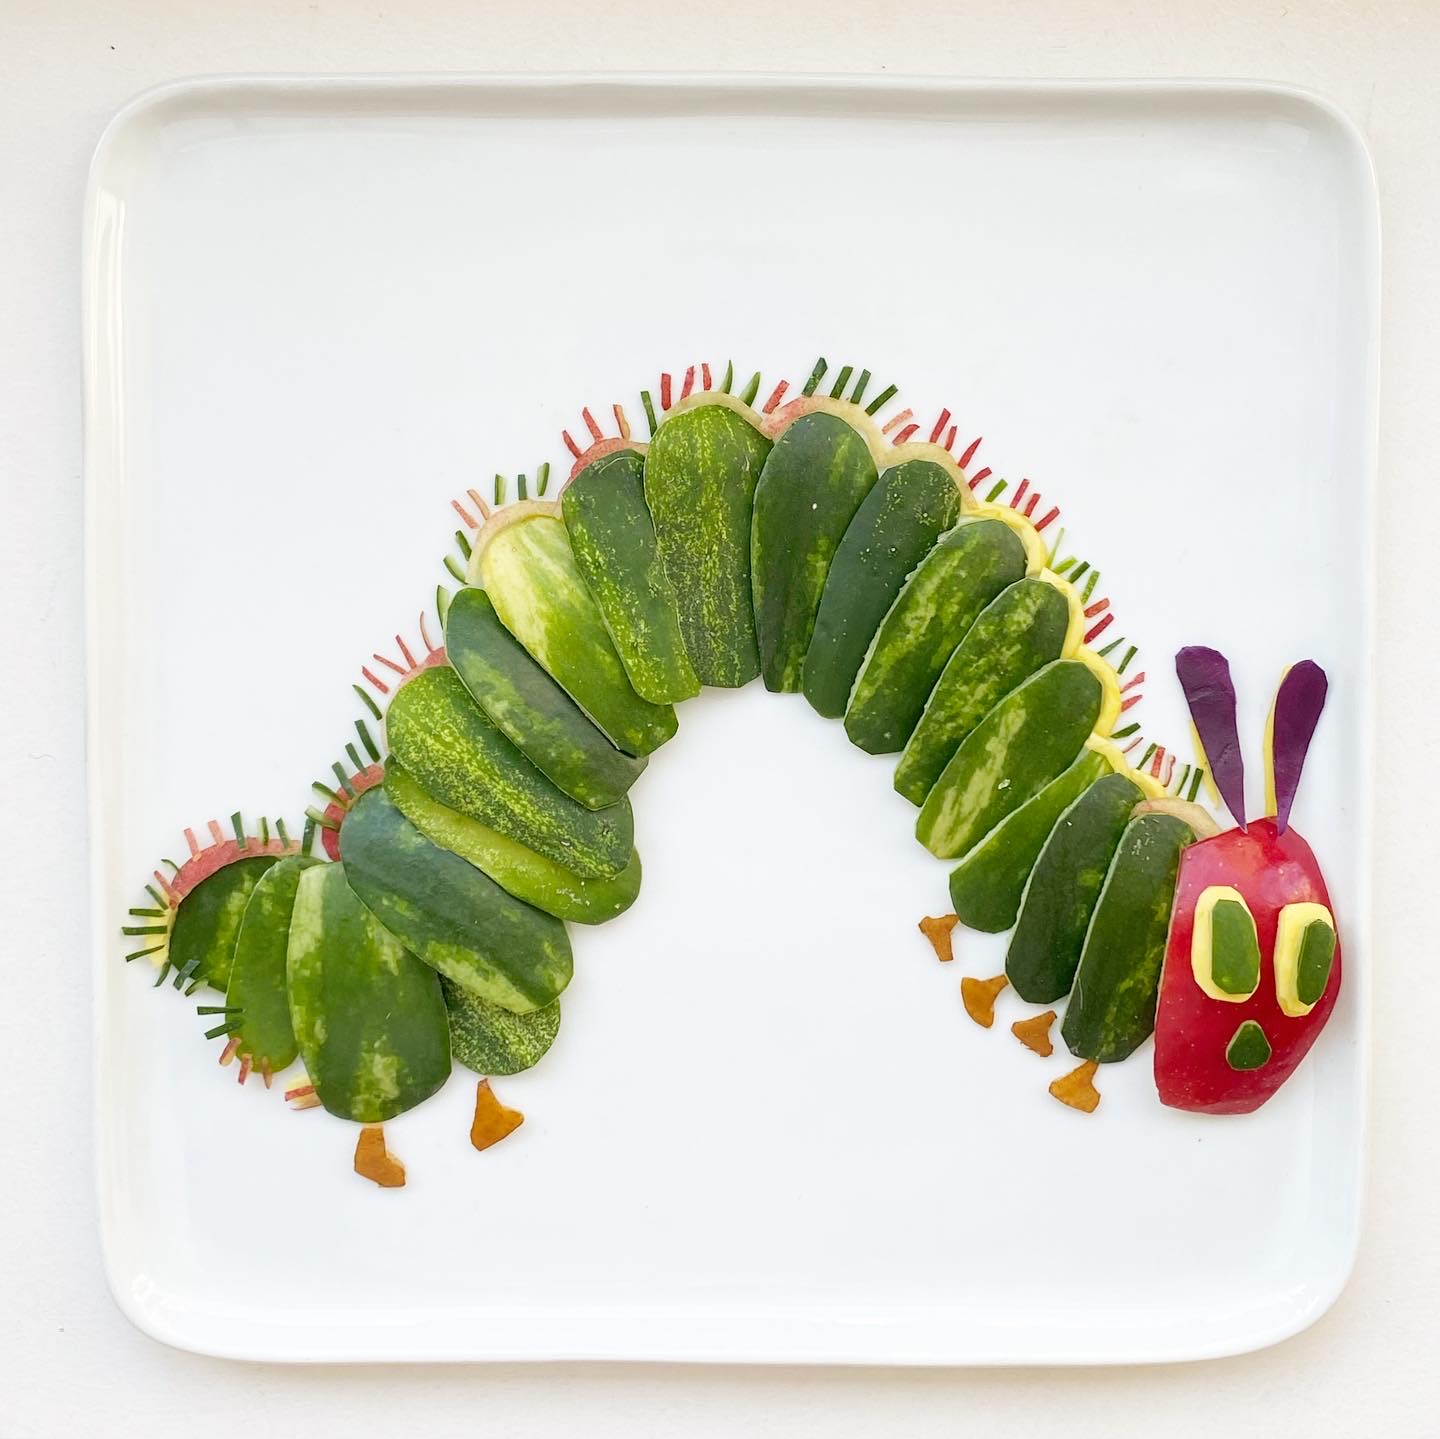 In memory of Eric Carle – watermelon, apple, purple cabbage, squash, pickle, pear and peach by Harley Langberg